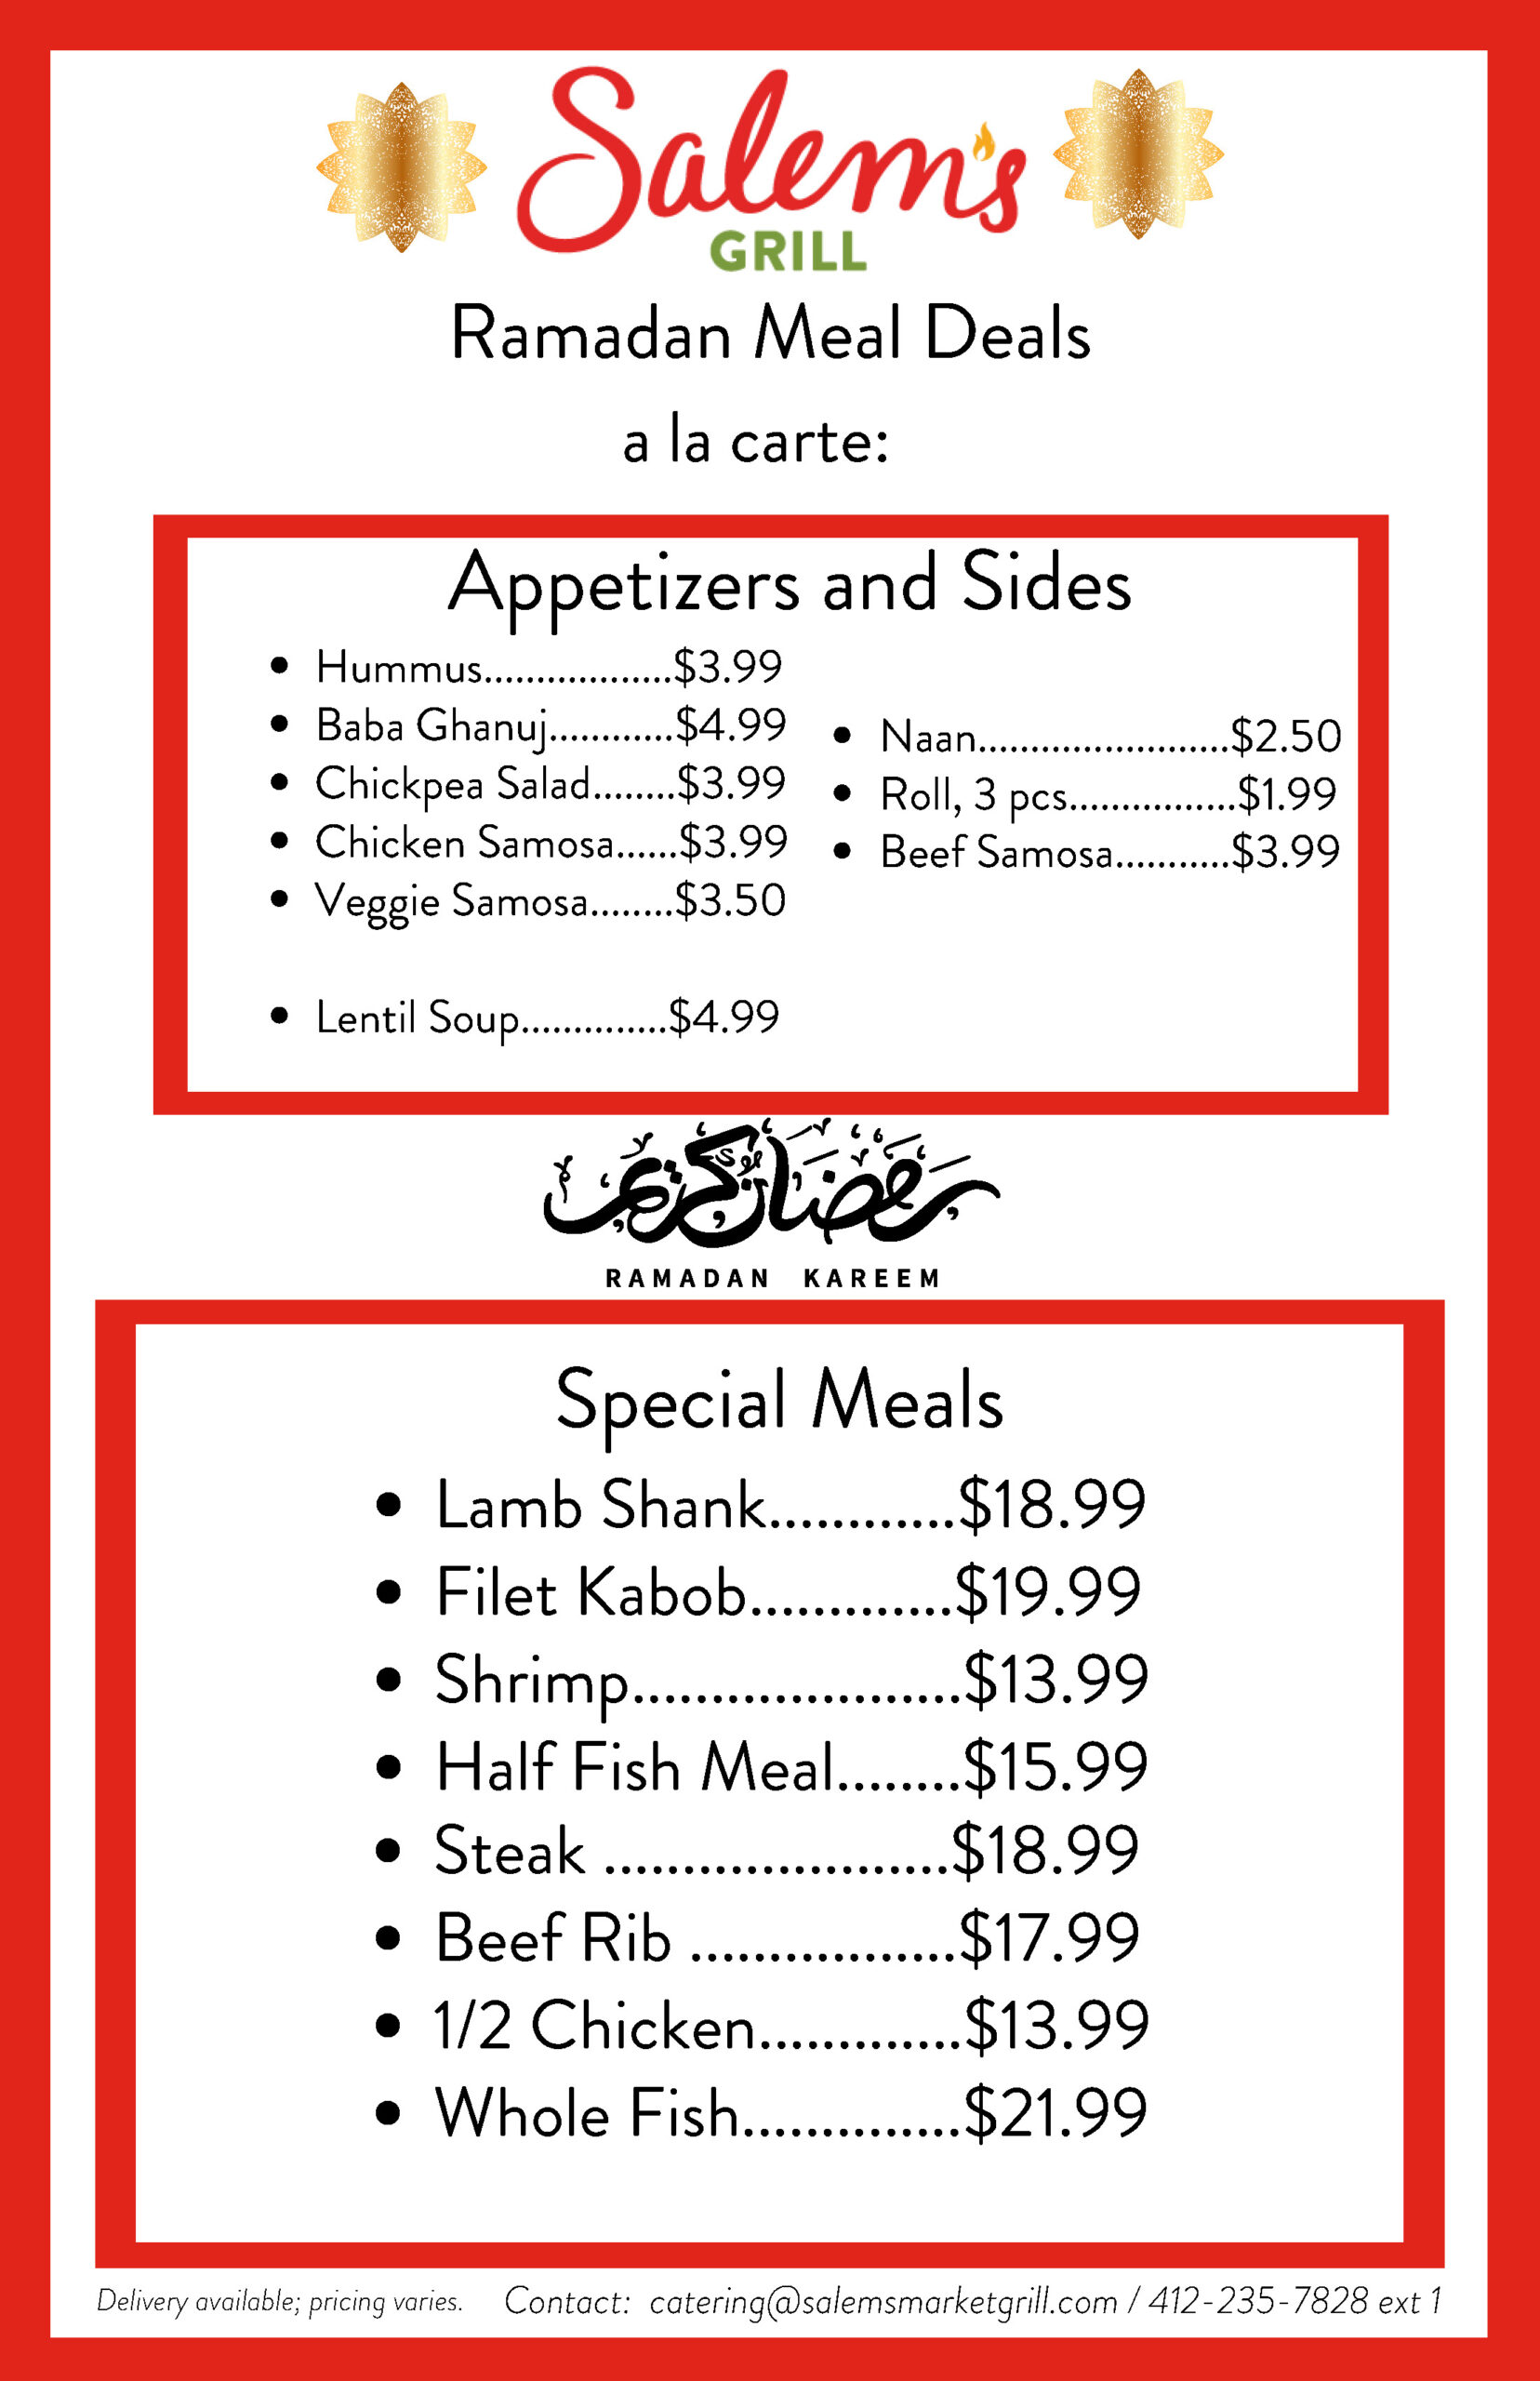 Appetizers and special meals for Ramadan. For more information call 412-235-7828.